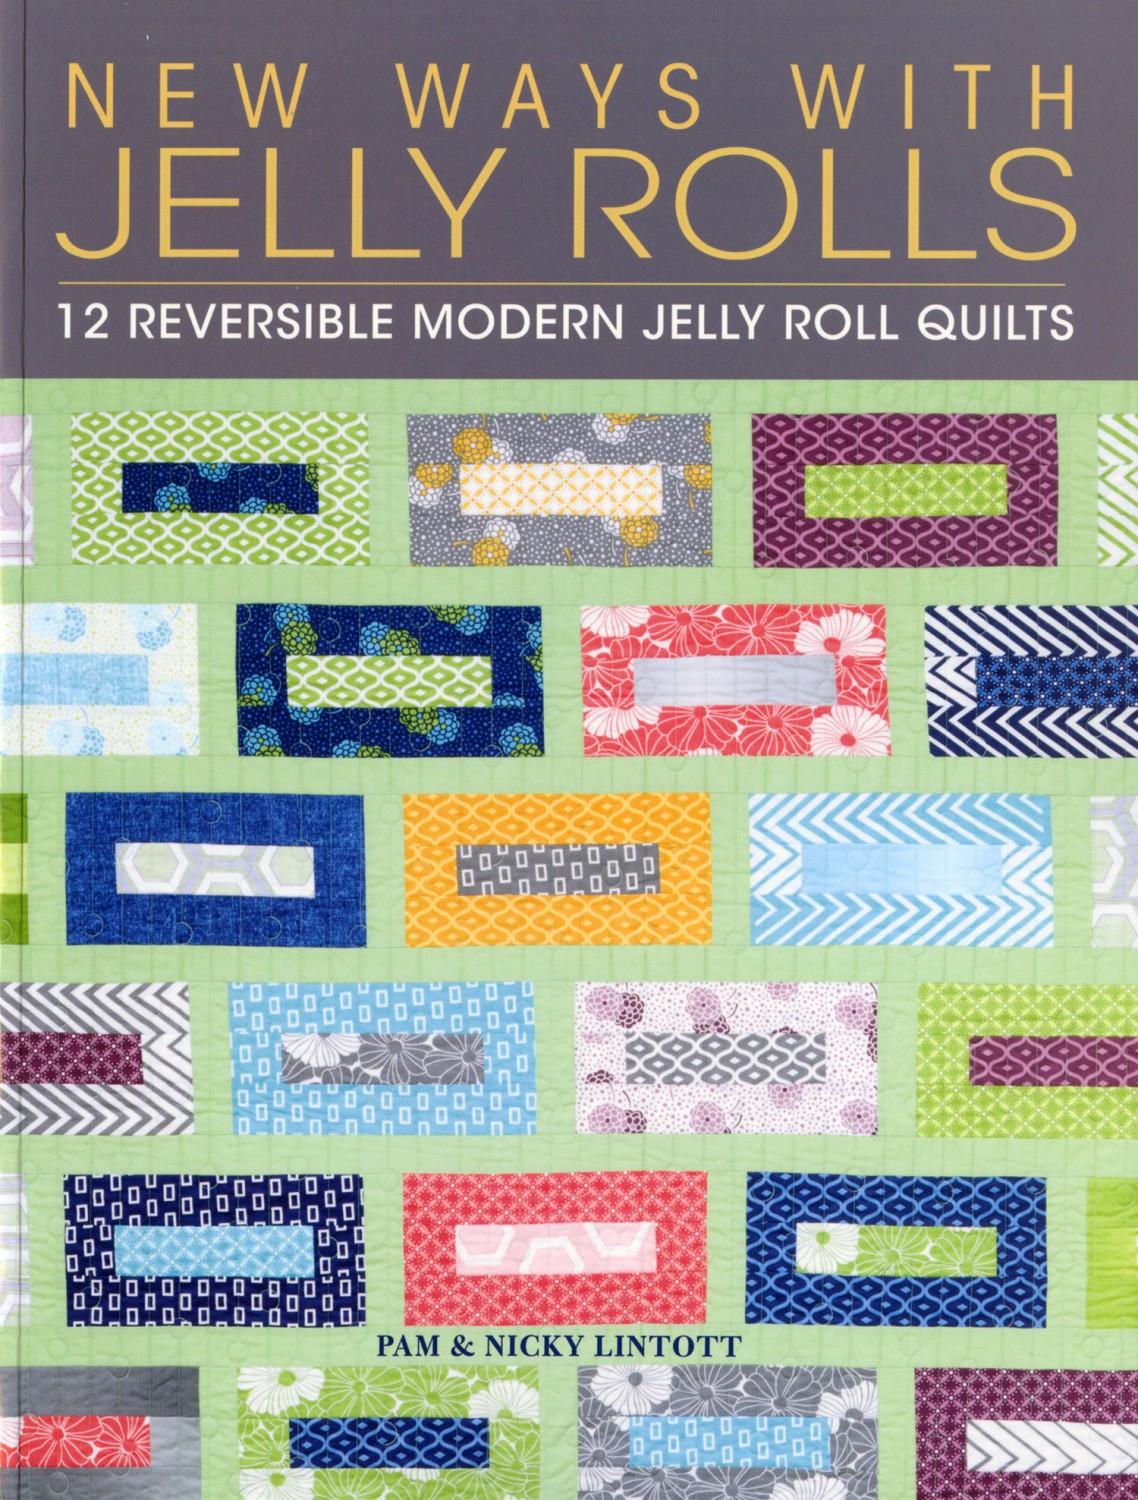 Simply Jelly Rolls [Book]